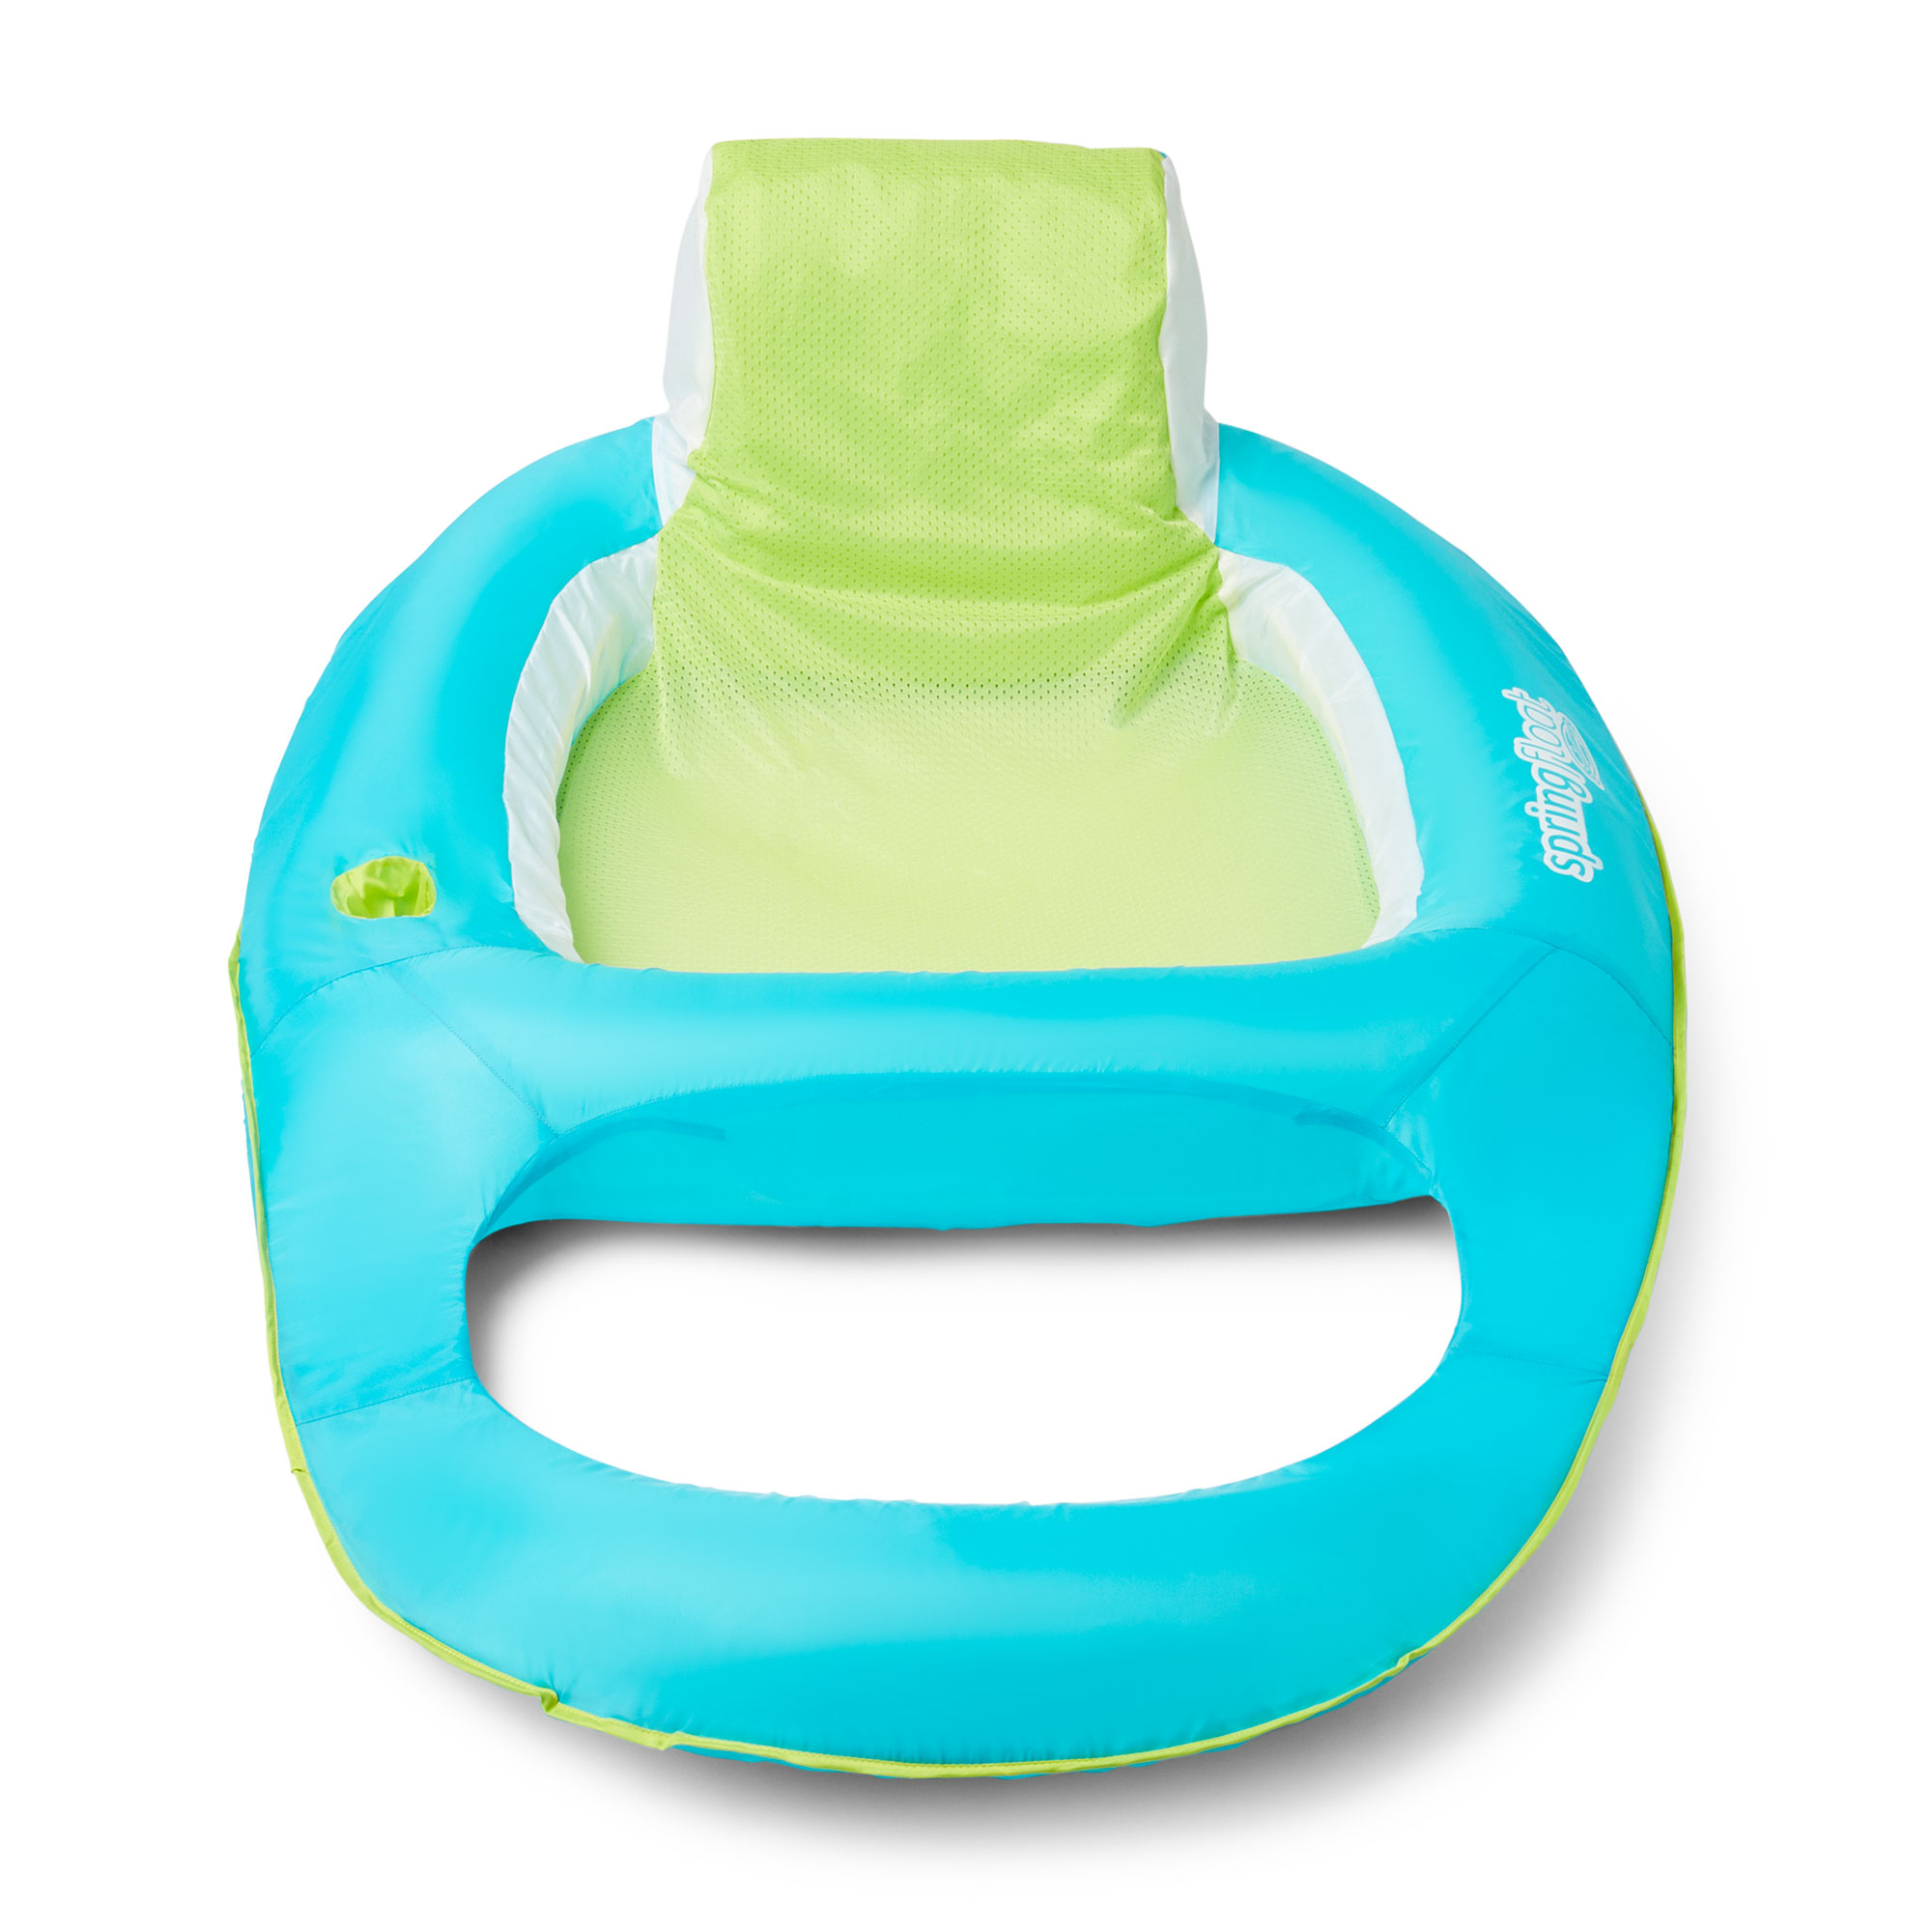 SwimWays Spring Float Swimming Pool Lounger Chaise Inflatable Floating Chair w/Cup Holder, Aqua & Lime - image 2 of 9